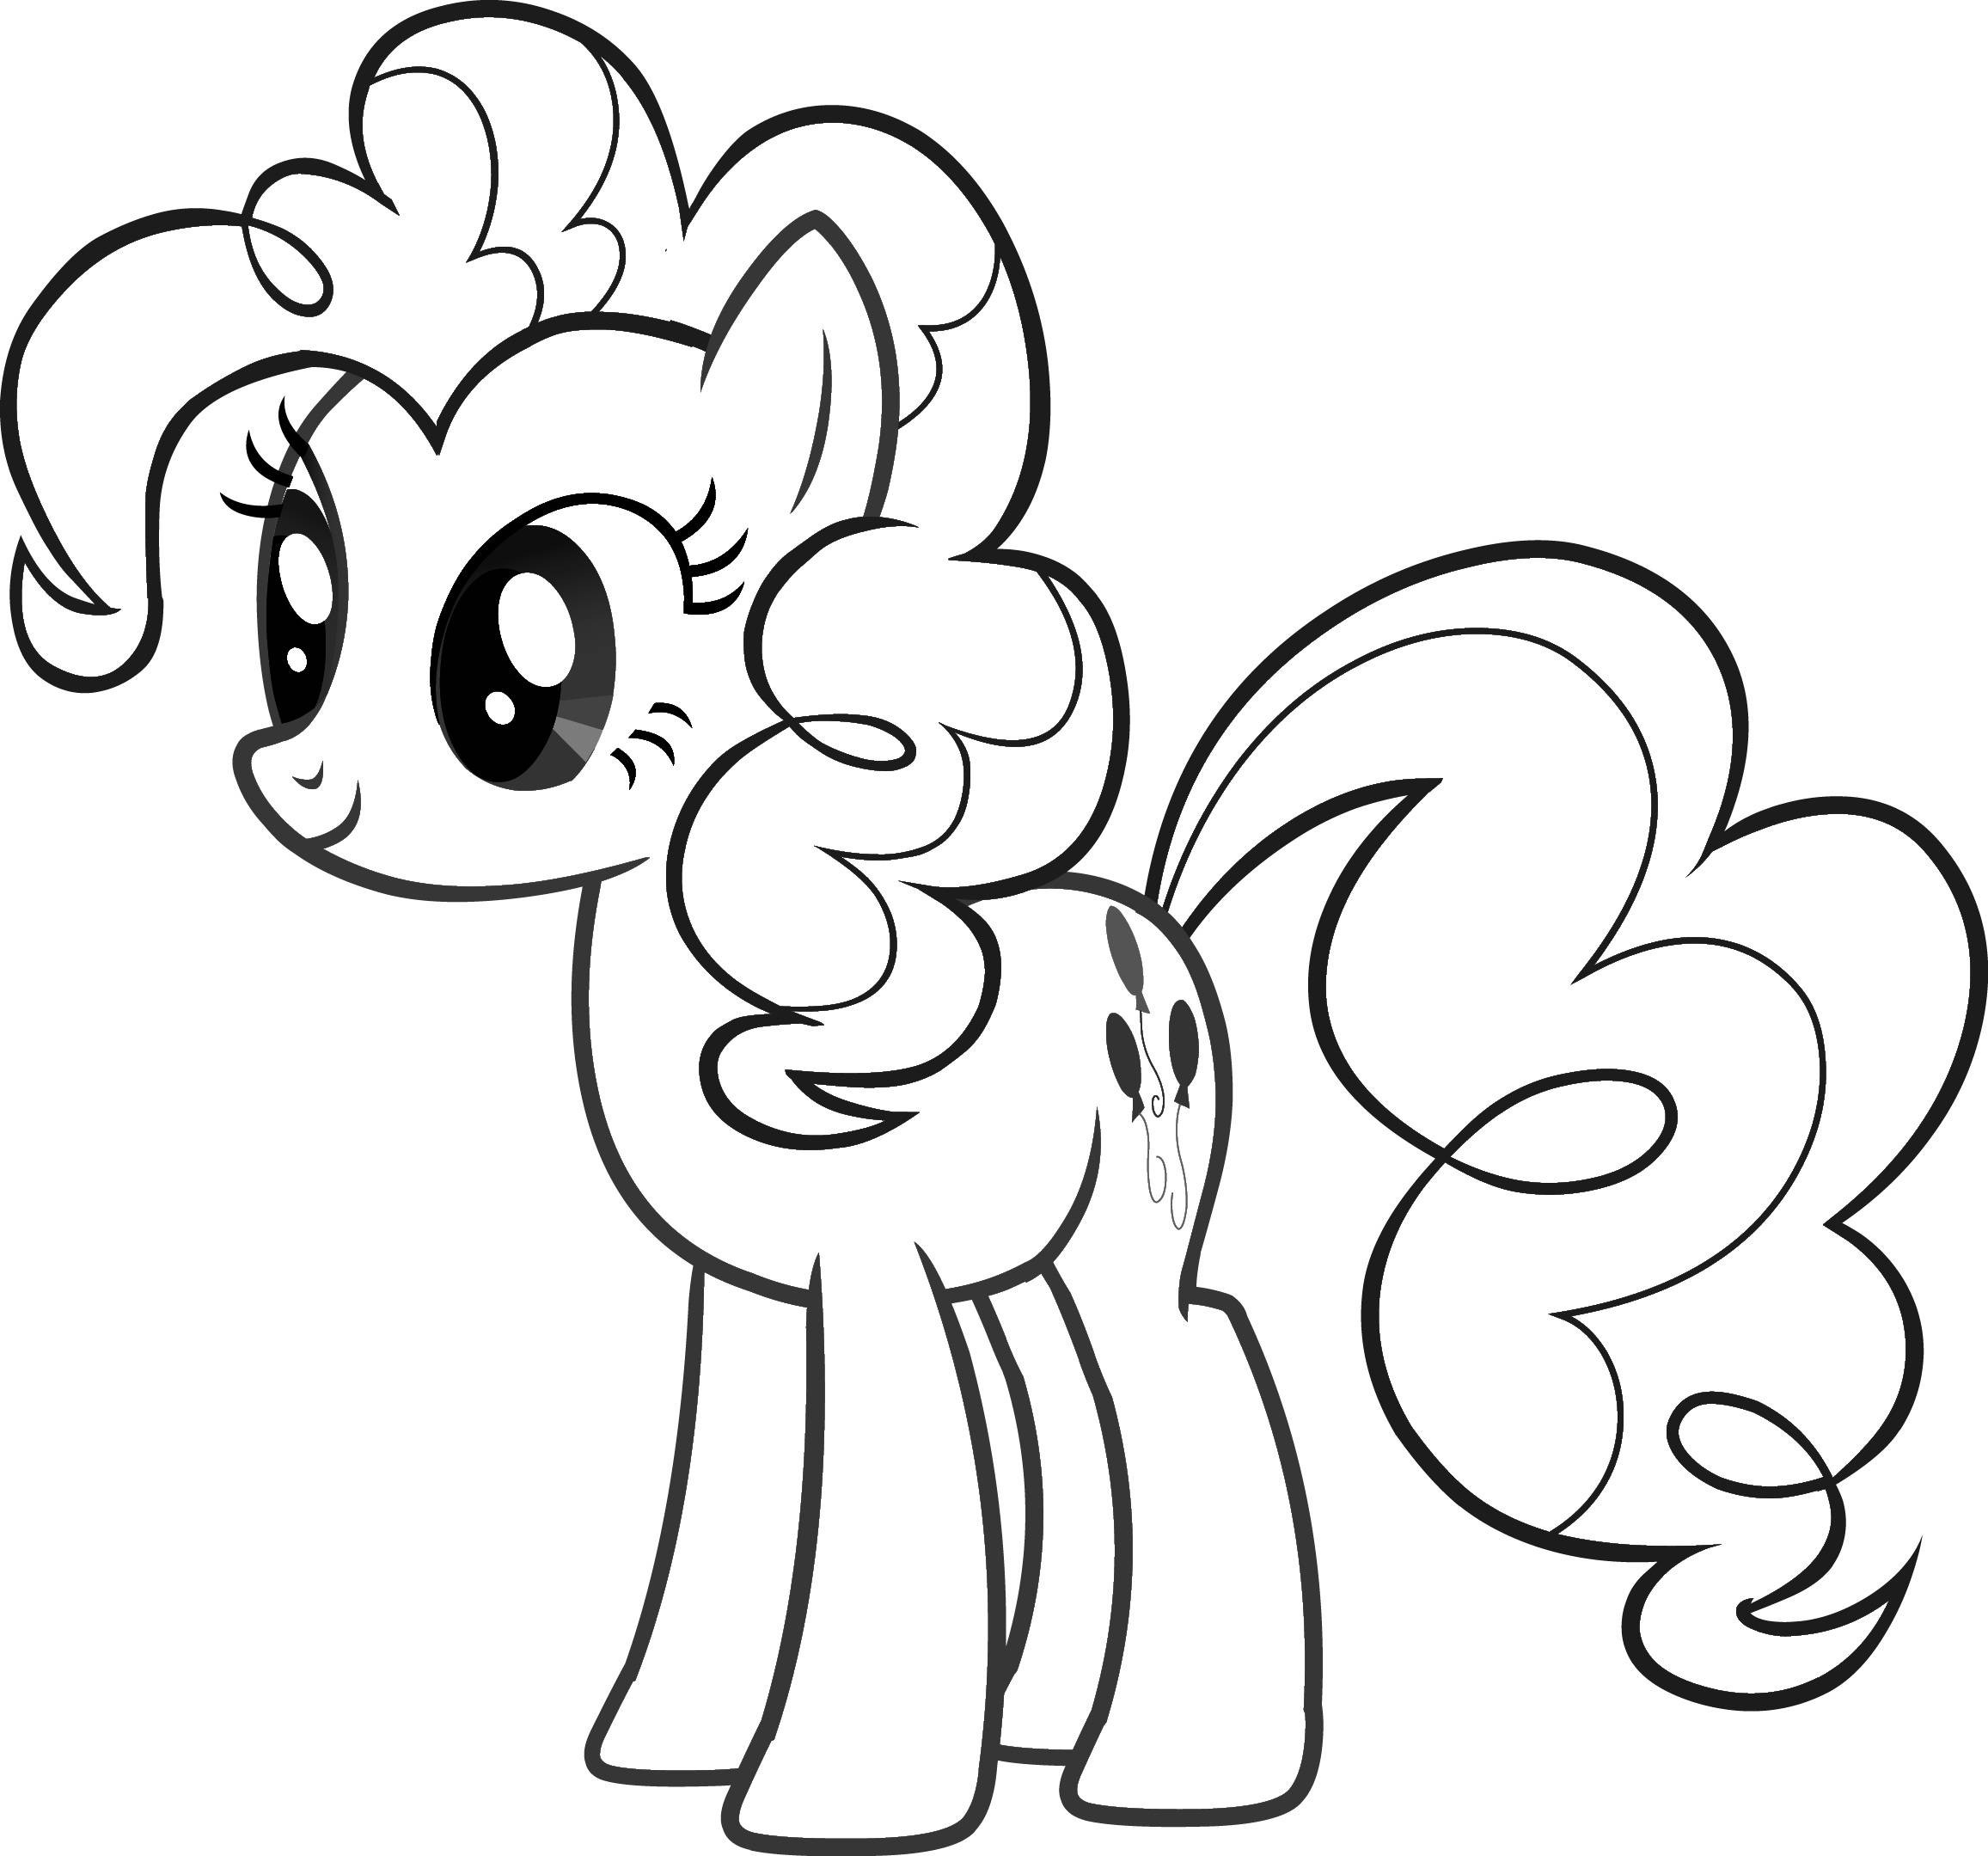 Coloring Pages For Kids My Little Pony
 toma un pony